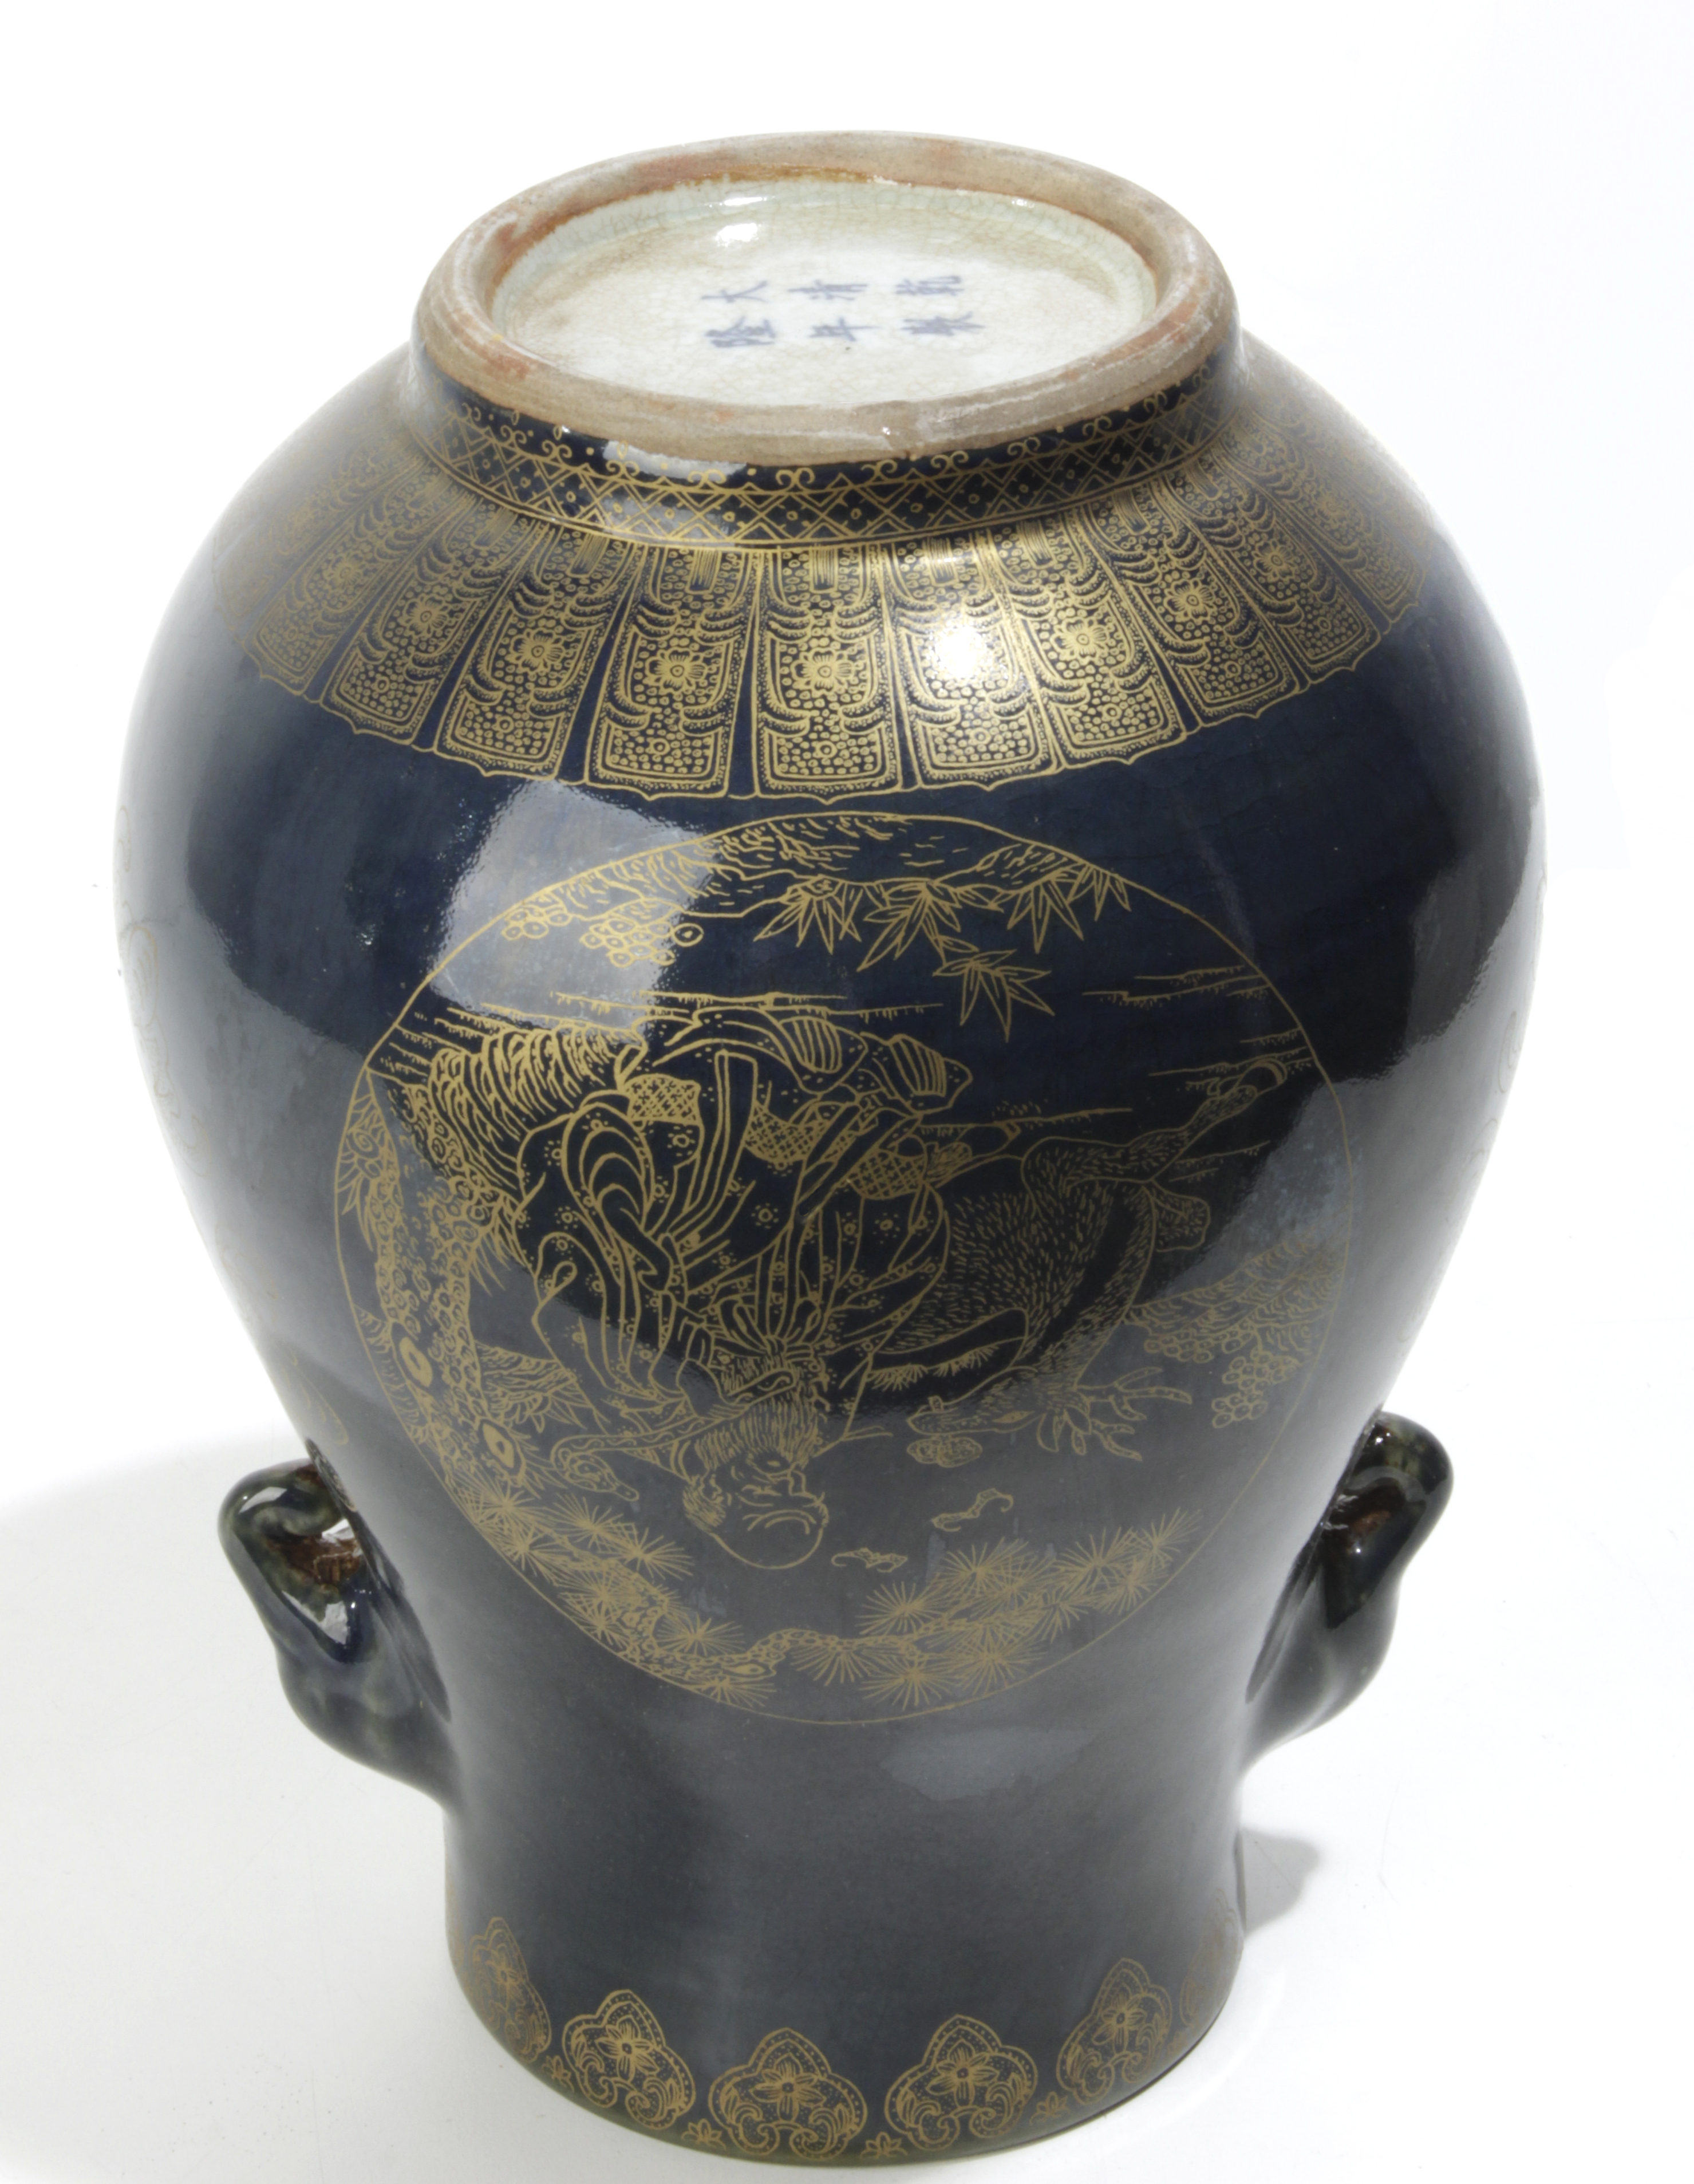 A 20th century Chinese porcelain vase - Image 3 of 3